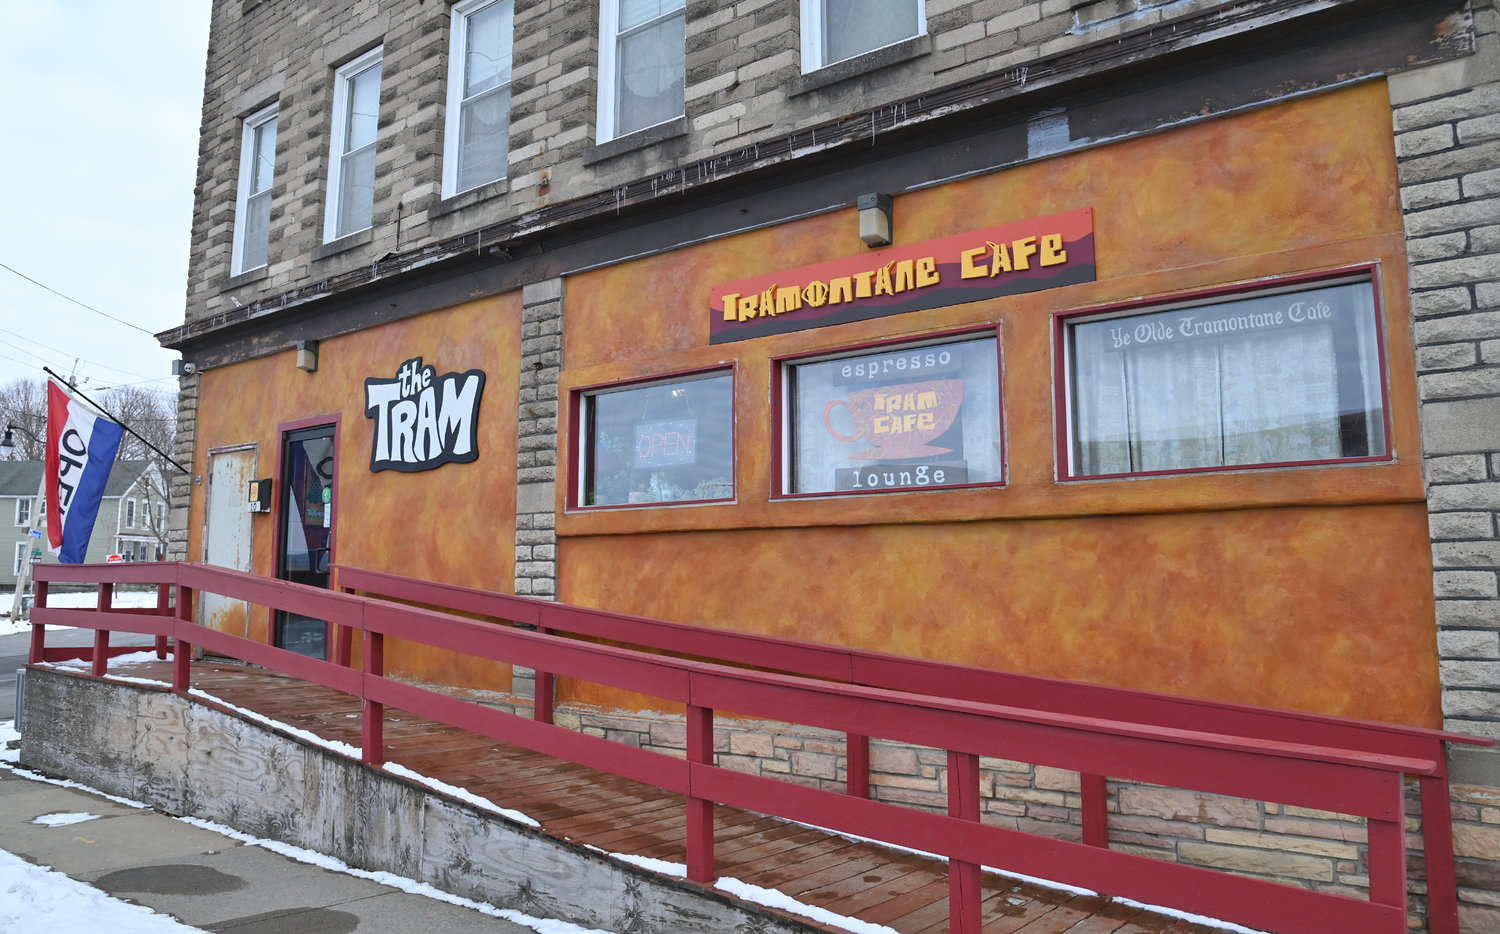 The Tramontane Cafe, The Tram, at 1105 Lincoln Ave. in Utica.